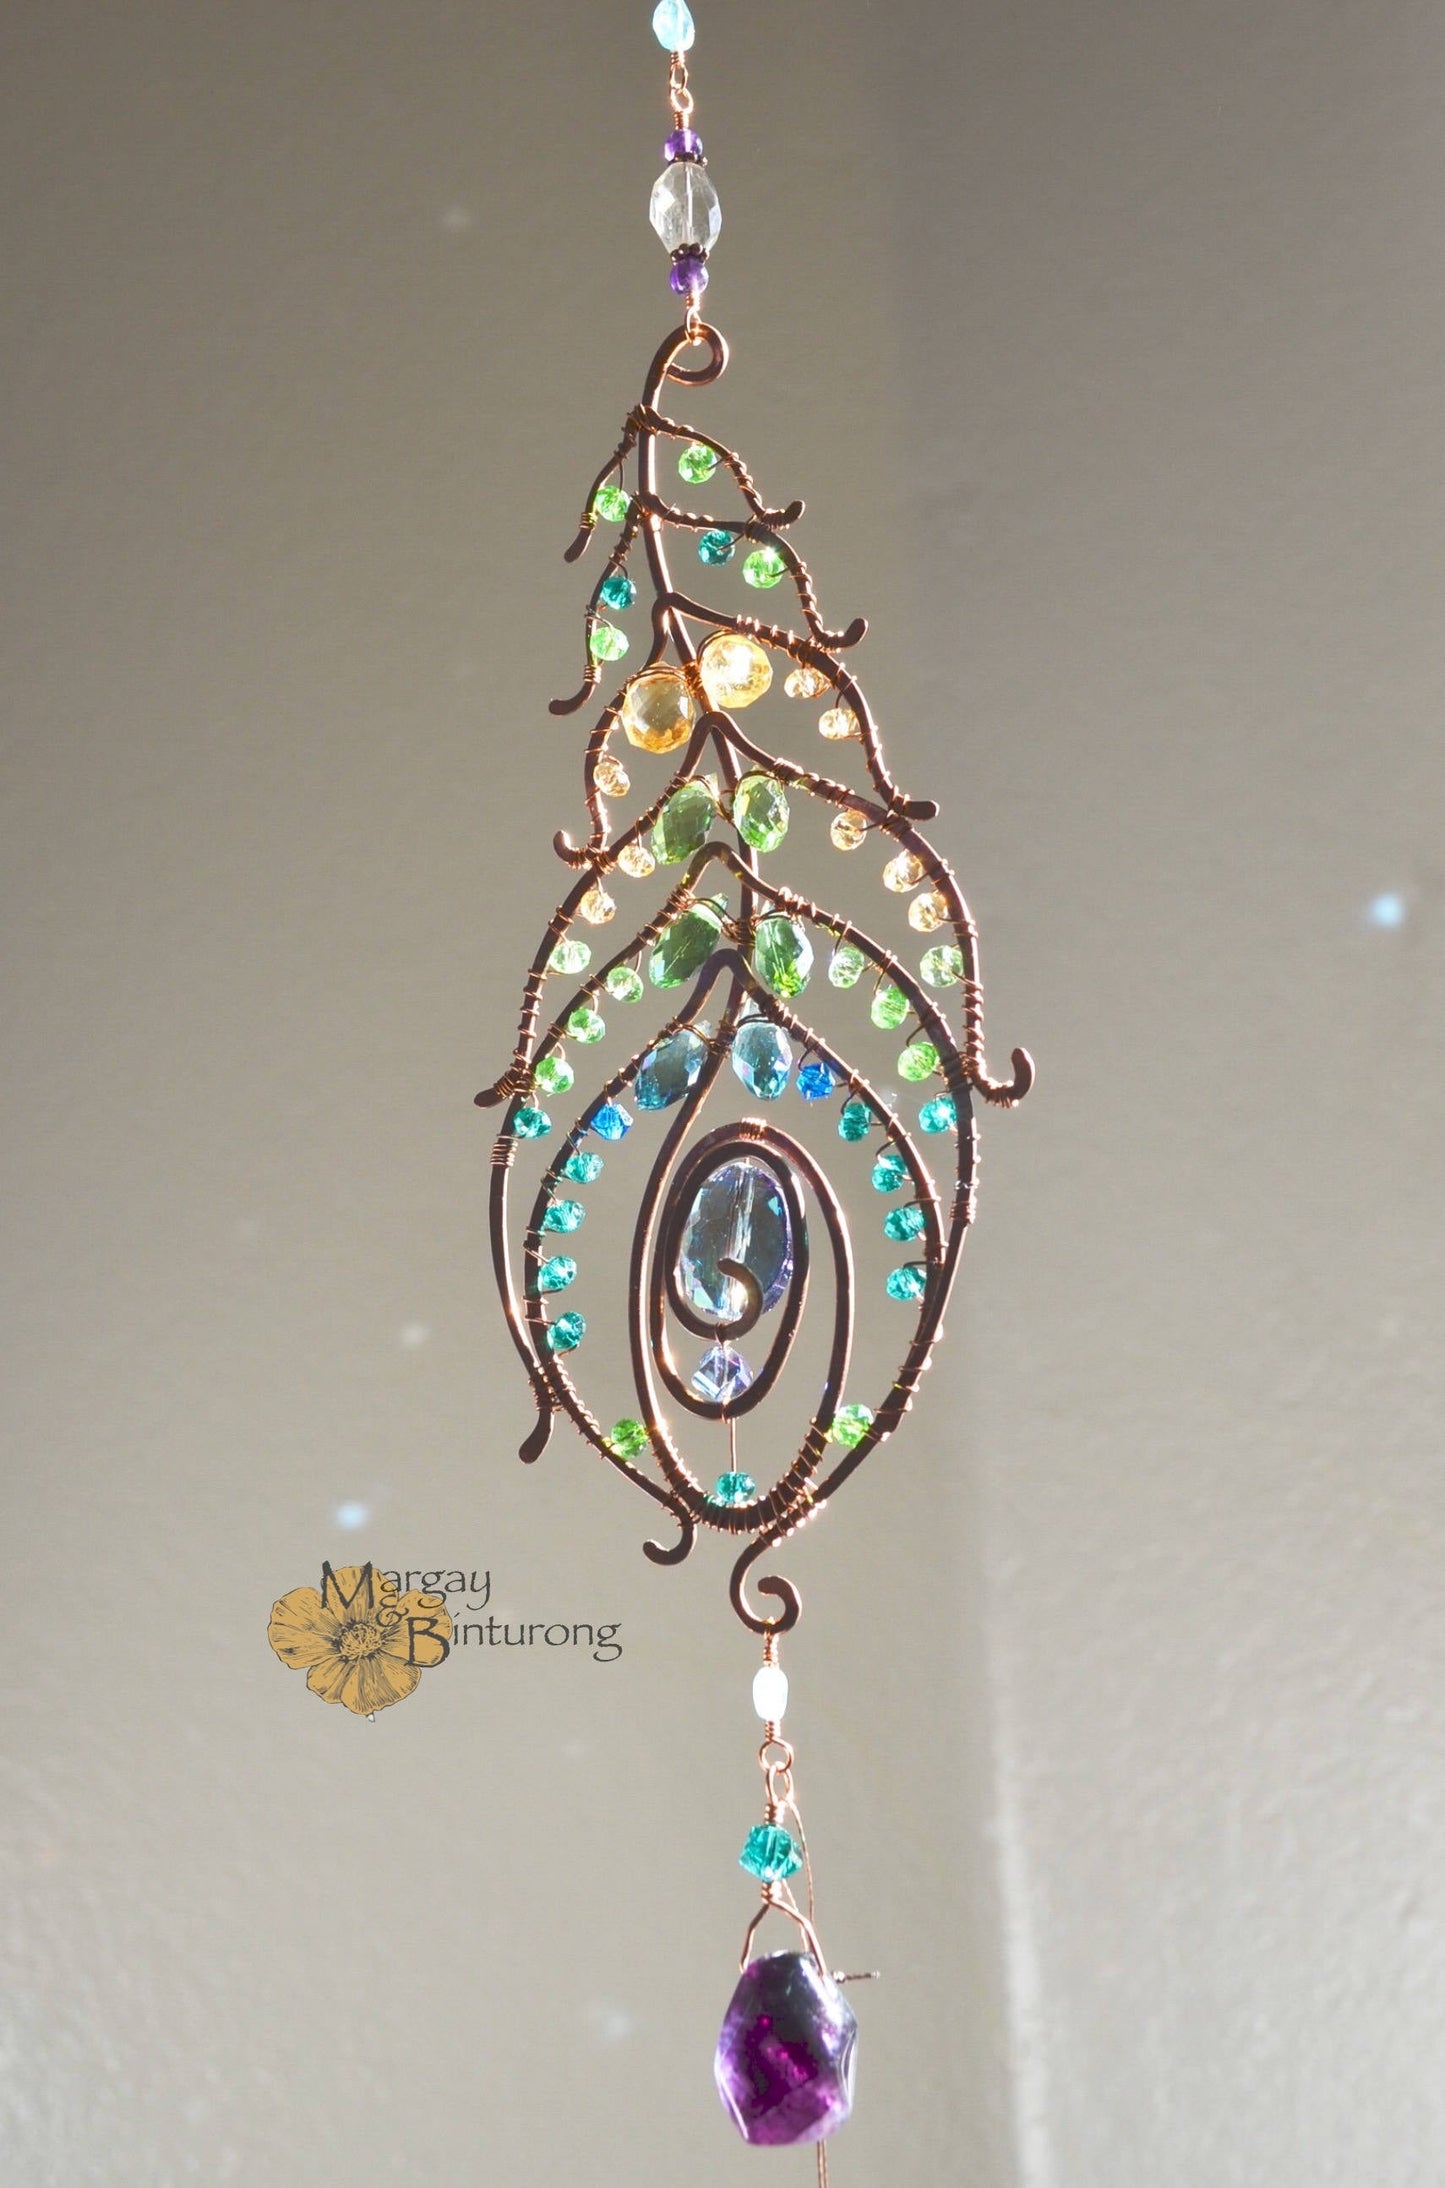 Peacock feather gemstone suncatcher fills the room with sparkles from crystal prism beads